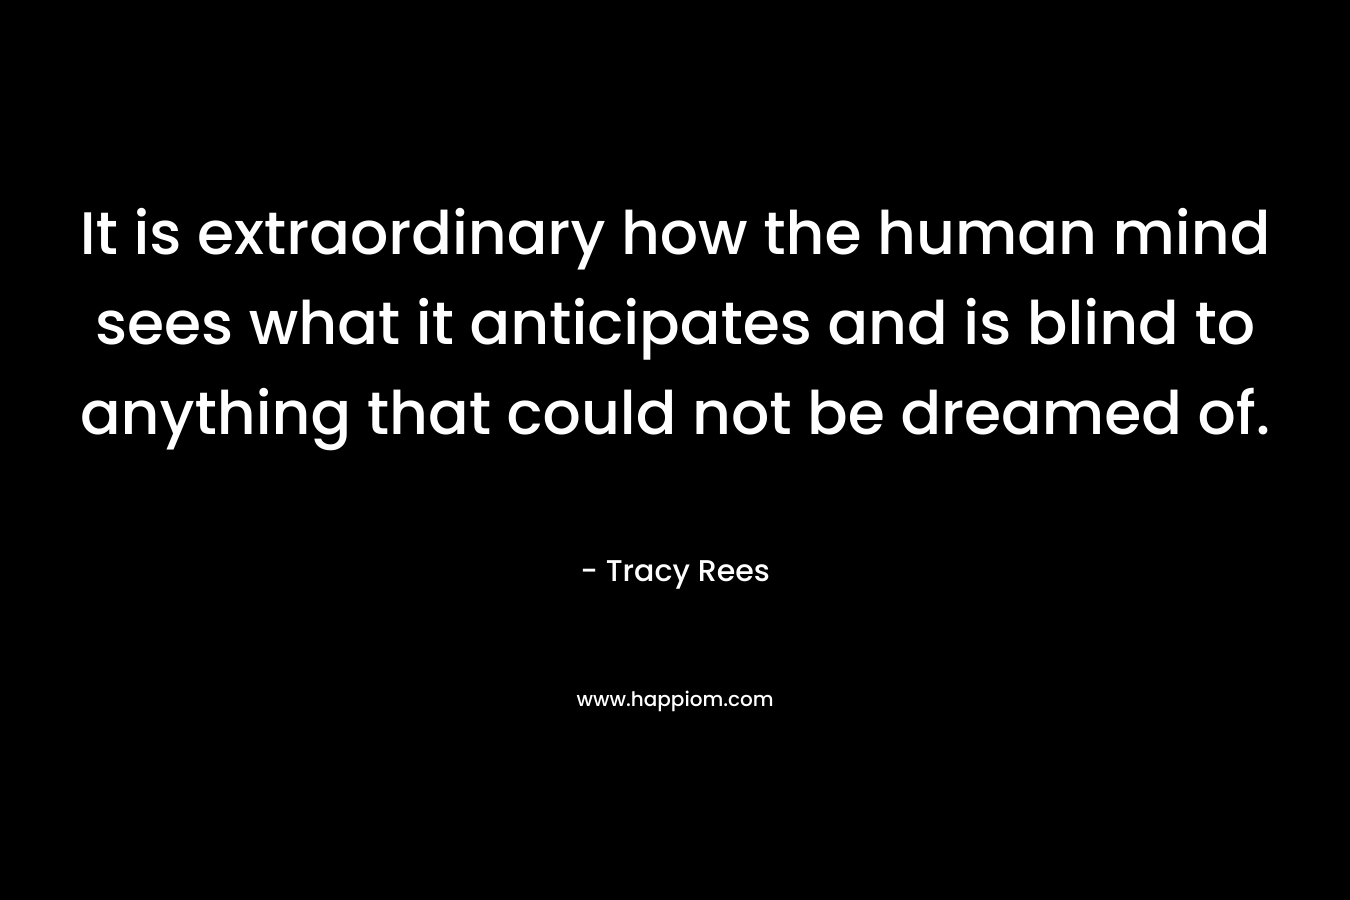 It is extraordinary how the human mind sees what it anticipates and is blind to anything that could not be dreamed of.